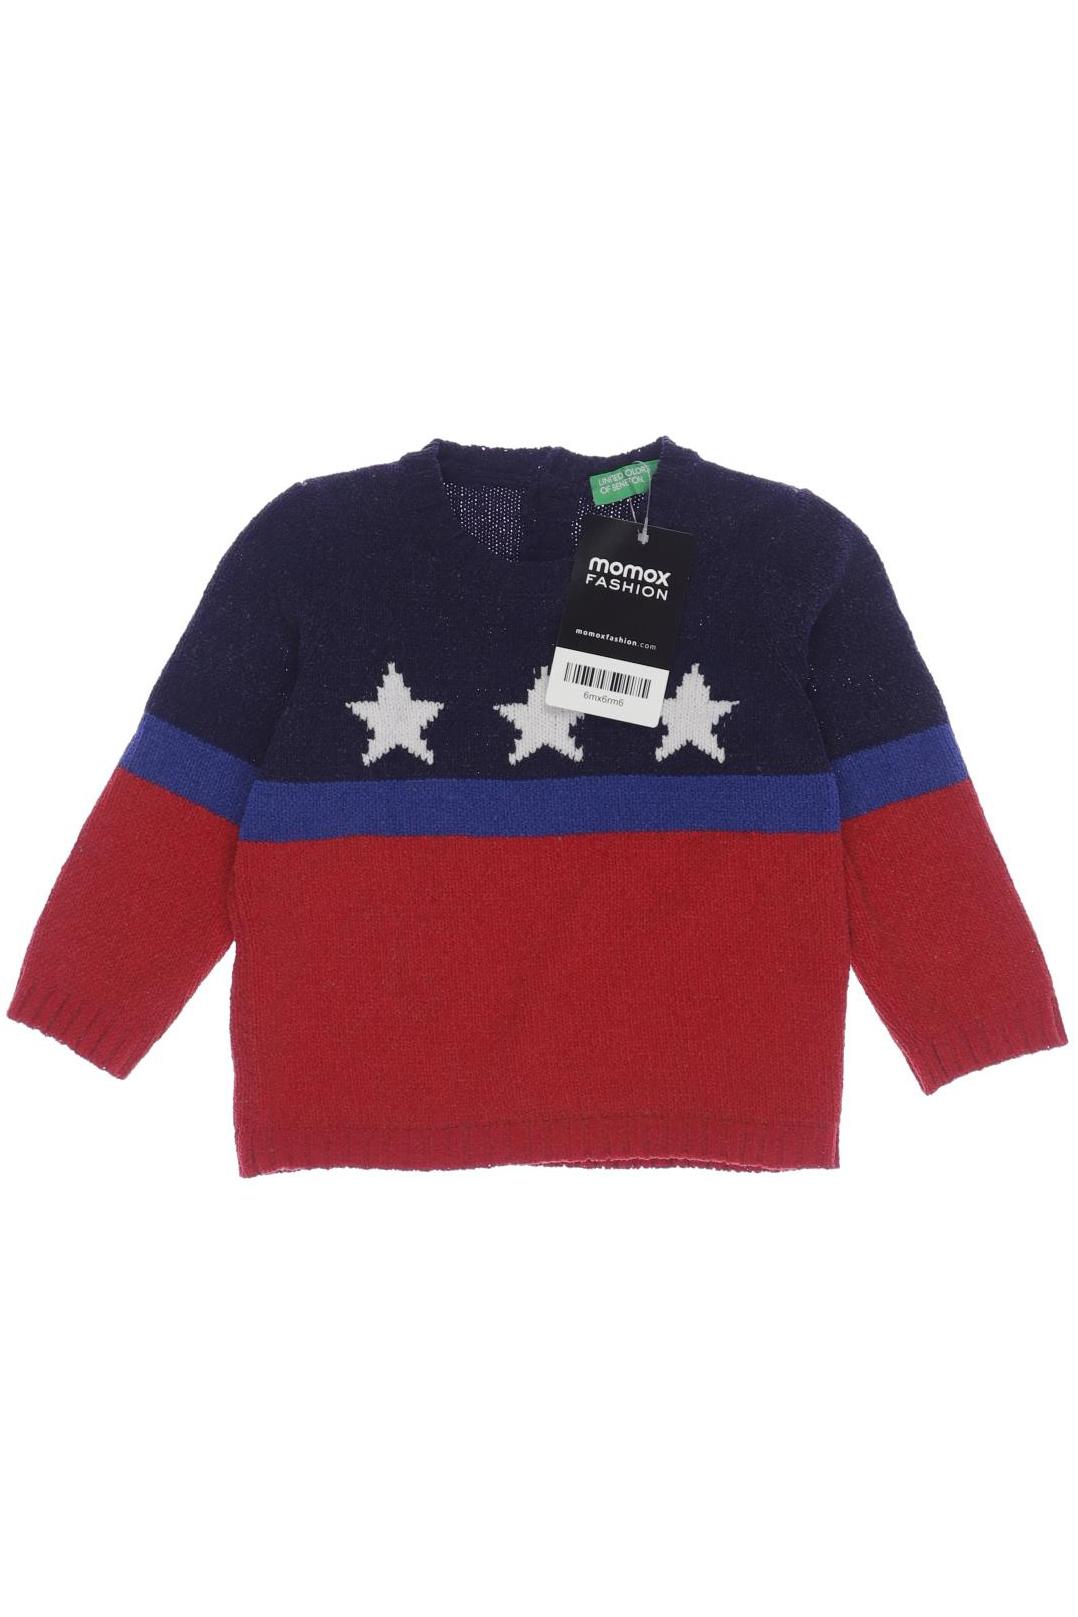 UNITED COLORS OF BENETTON Jungen Pullover, mehrfarbig von United Colors of Benetton